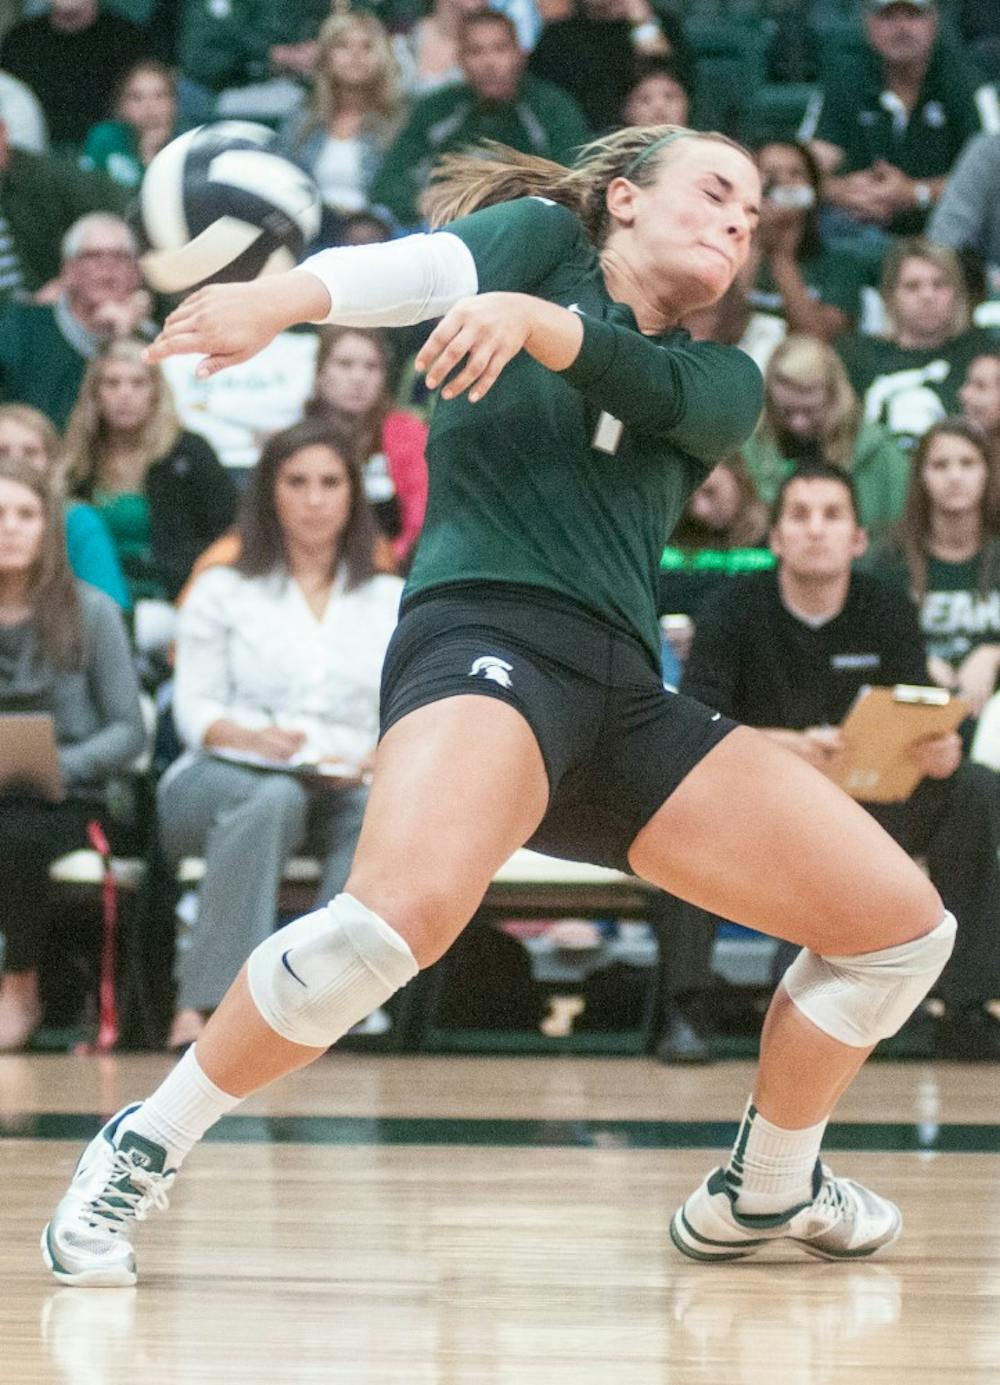 The ball hits libero Kori Moster during the game against Purdue on Friday, Sept. 21, 2012. The Spartans lost against No. 17 Purdue 3-2. Julia Nagy/The State News